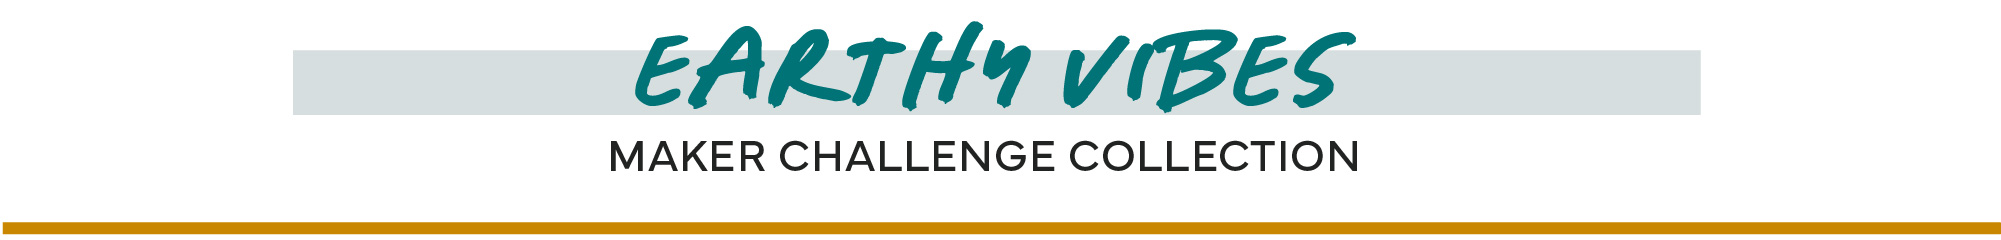 Maker Challenge Collection, Earthy Vibes